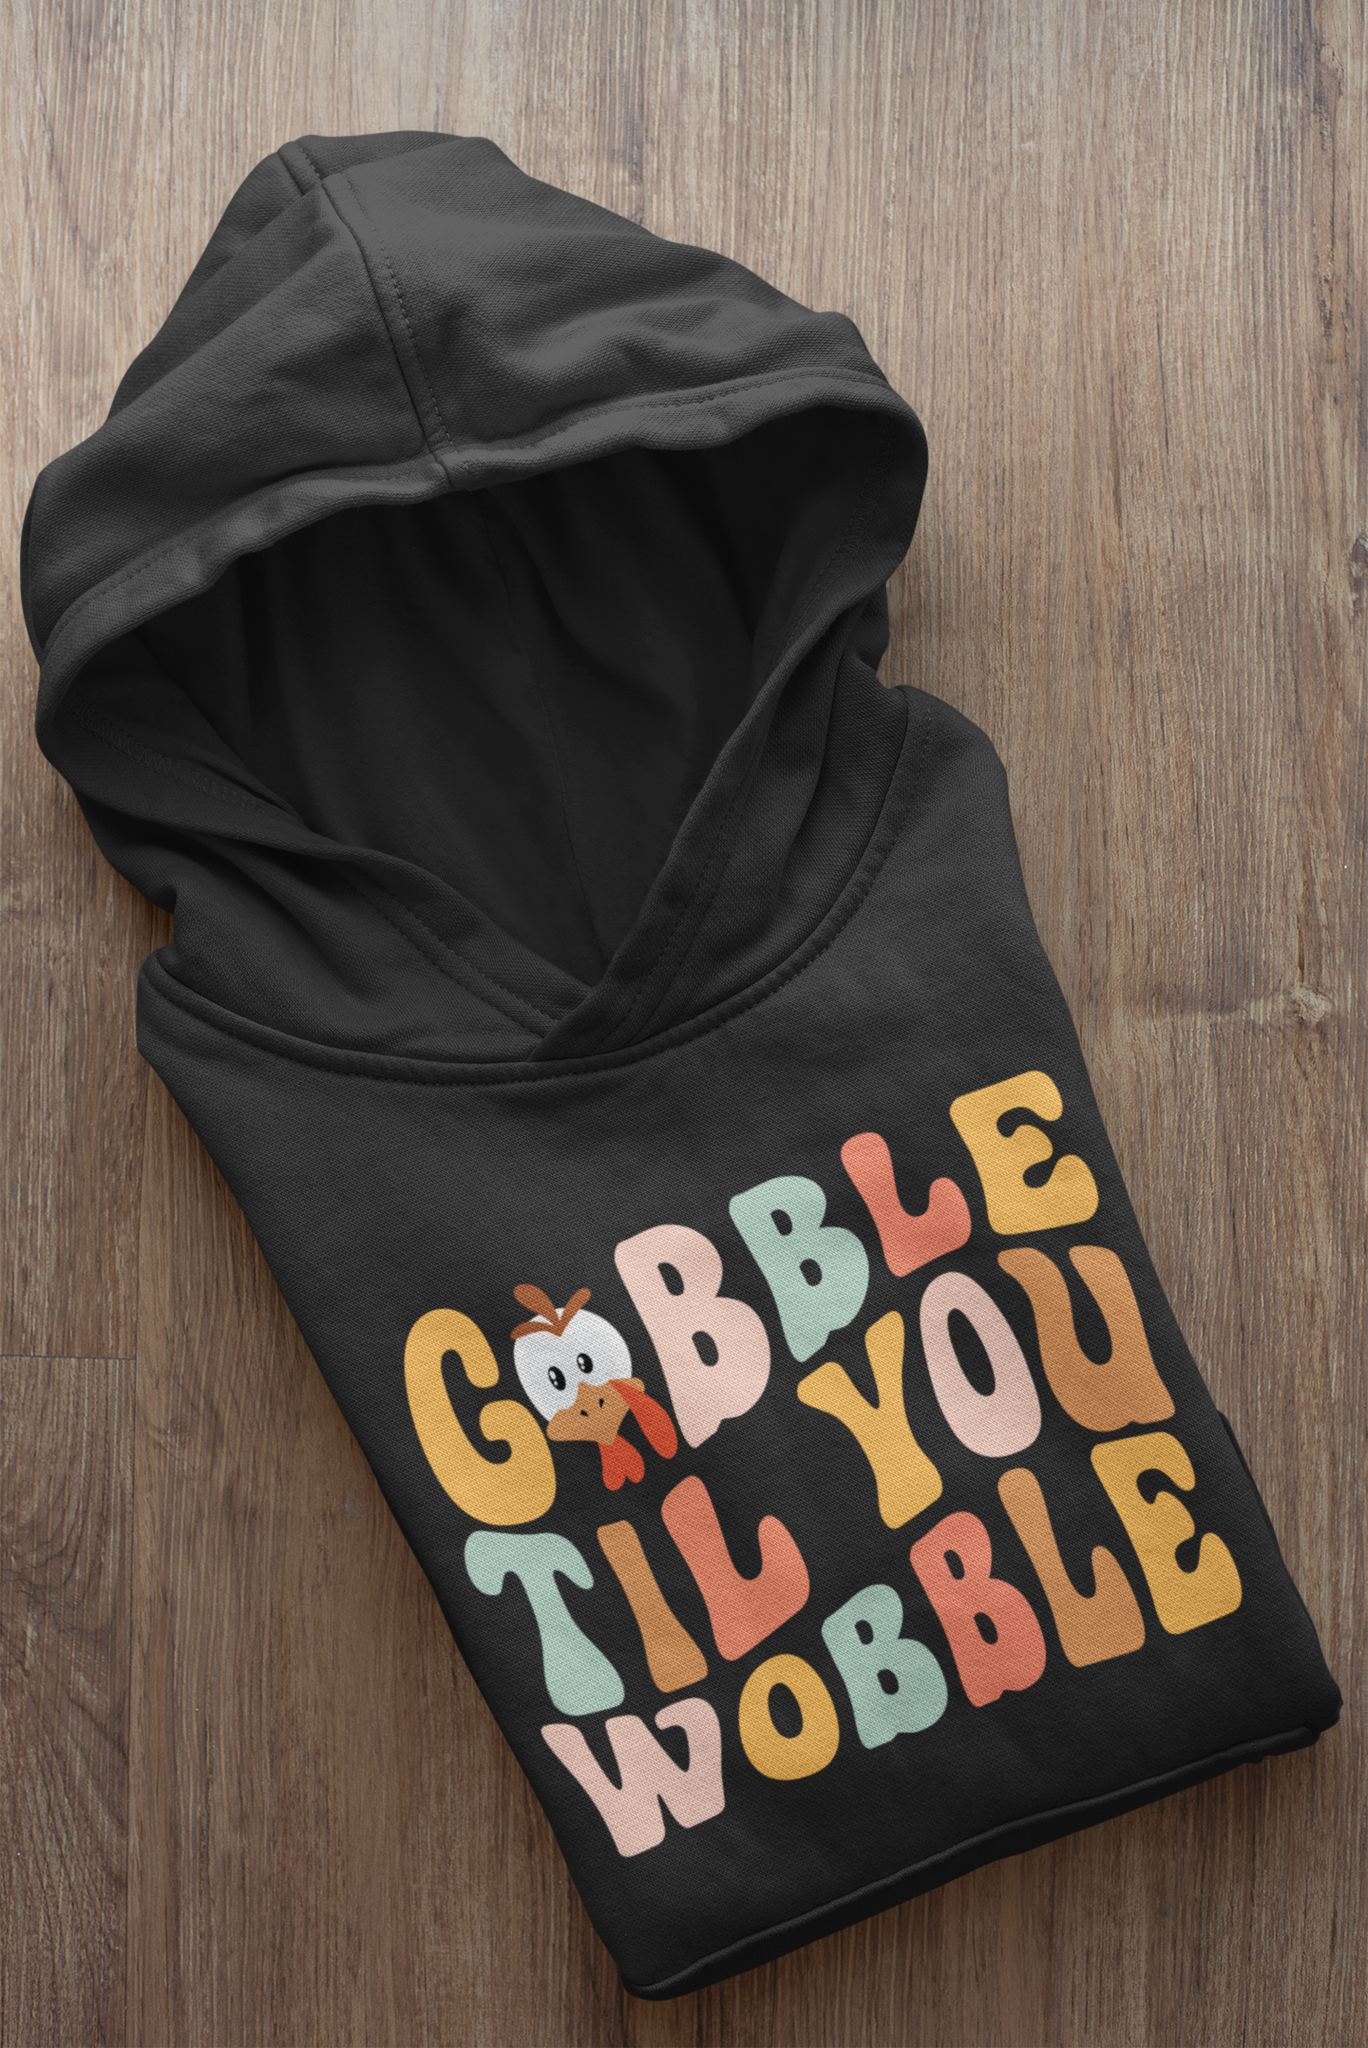 GOBBLE TIL YOU WOBBLE SOFT STYLE HOODIE - Hike Beast Store